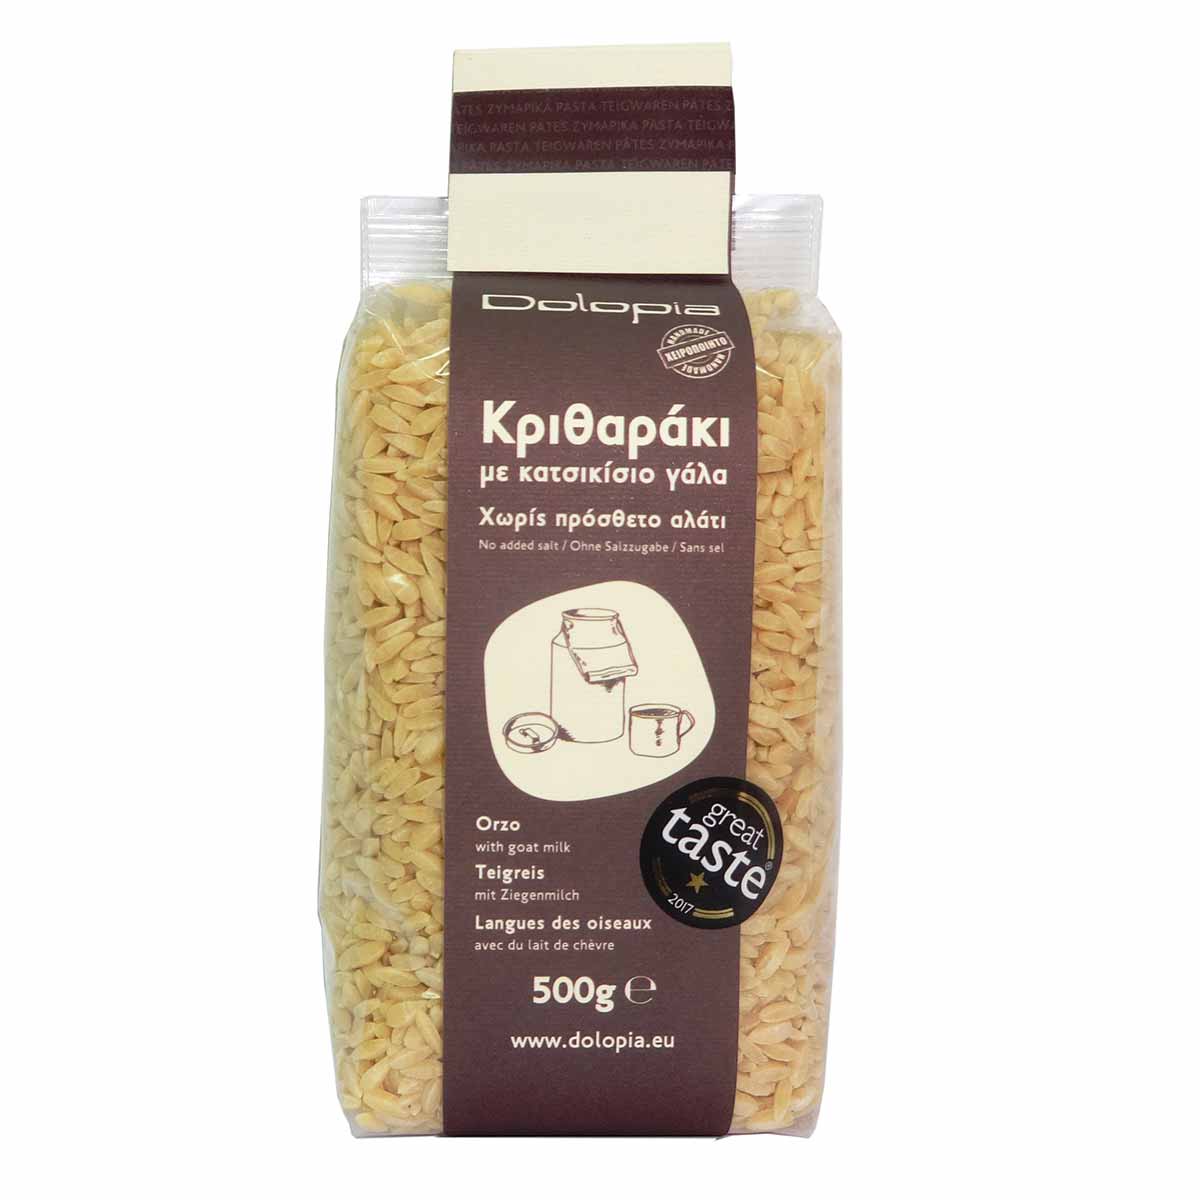 Orzo with 28% Goat Milk, no added salt, 500gr, "Dolopia"